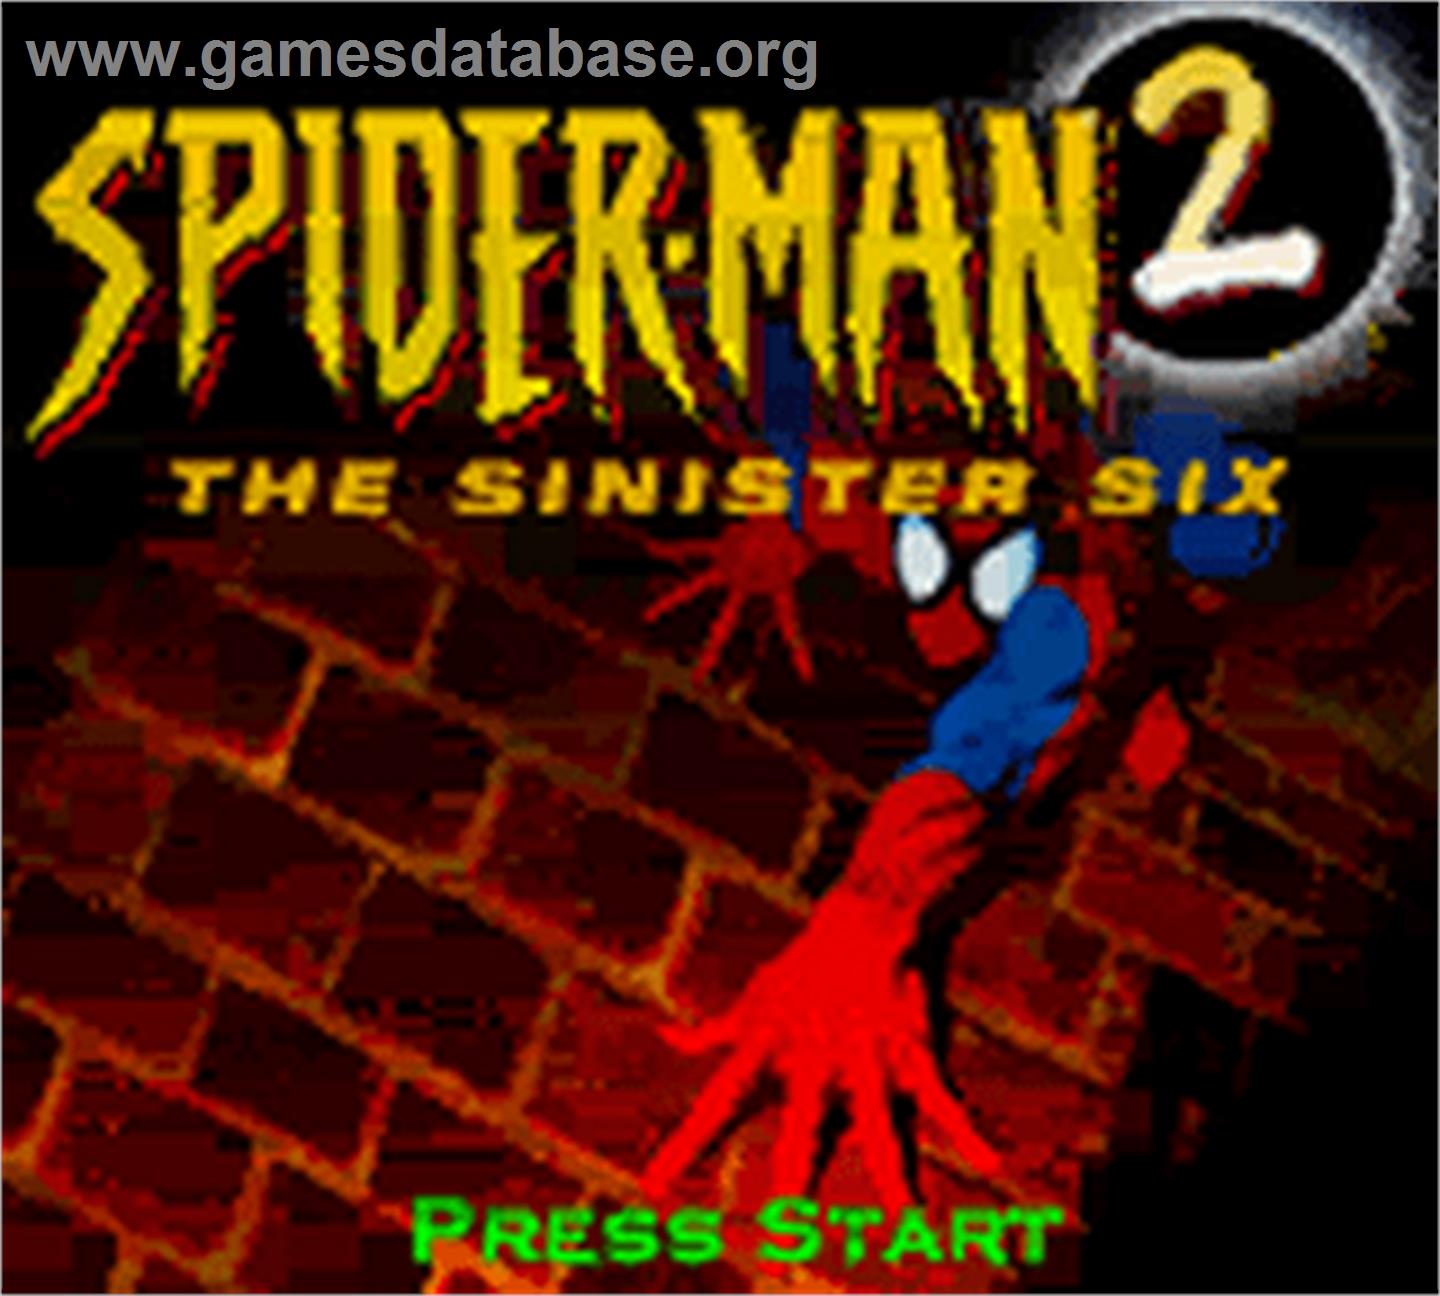 Spider-Man 2: The Sinister Six - Nintendo Game Boy Color - Artwork - Title Screen